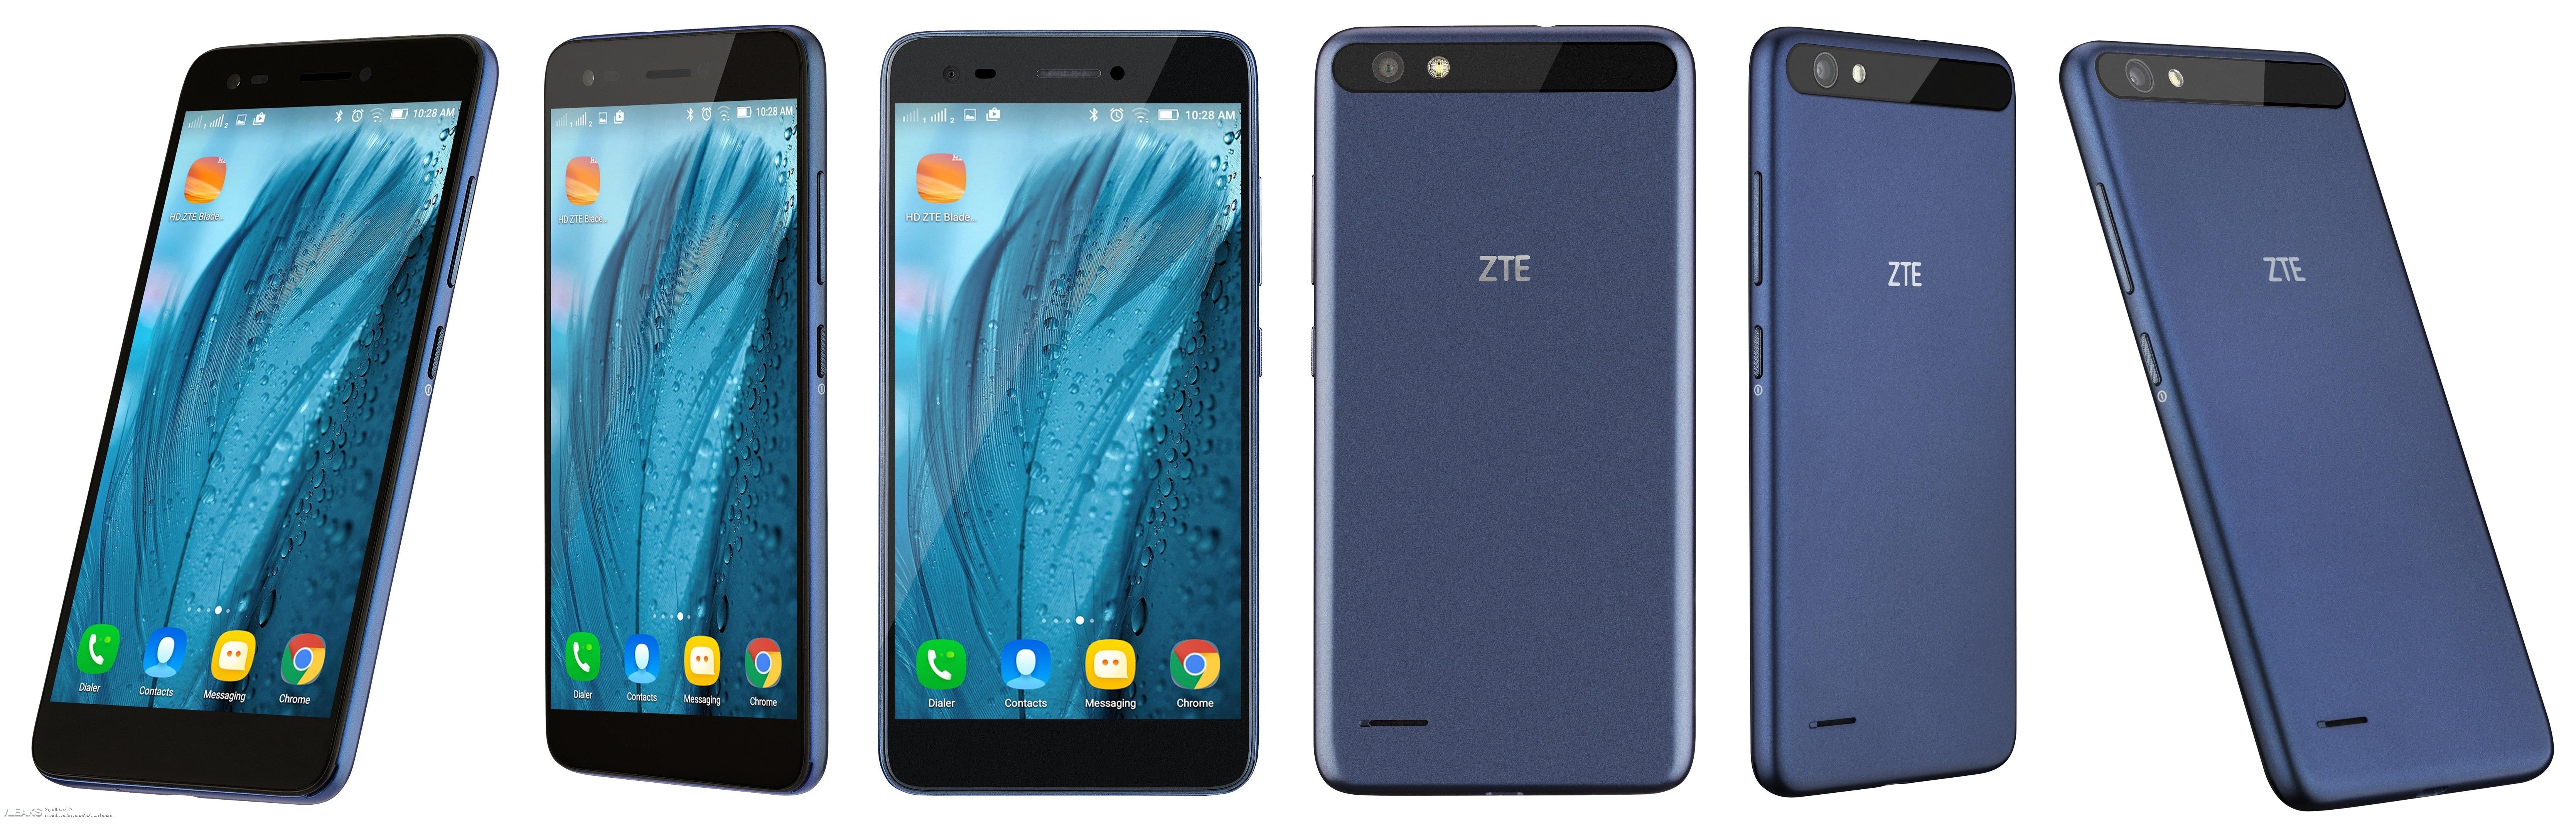 Unboxing del ZTE Blade A6 (Video)